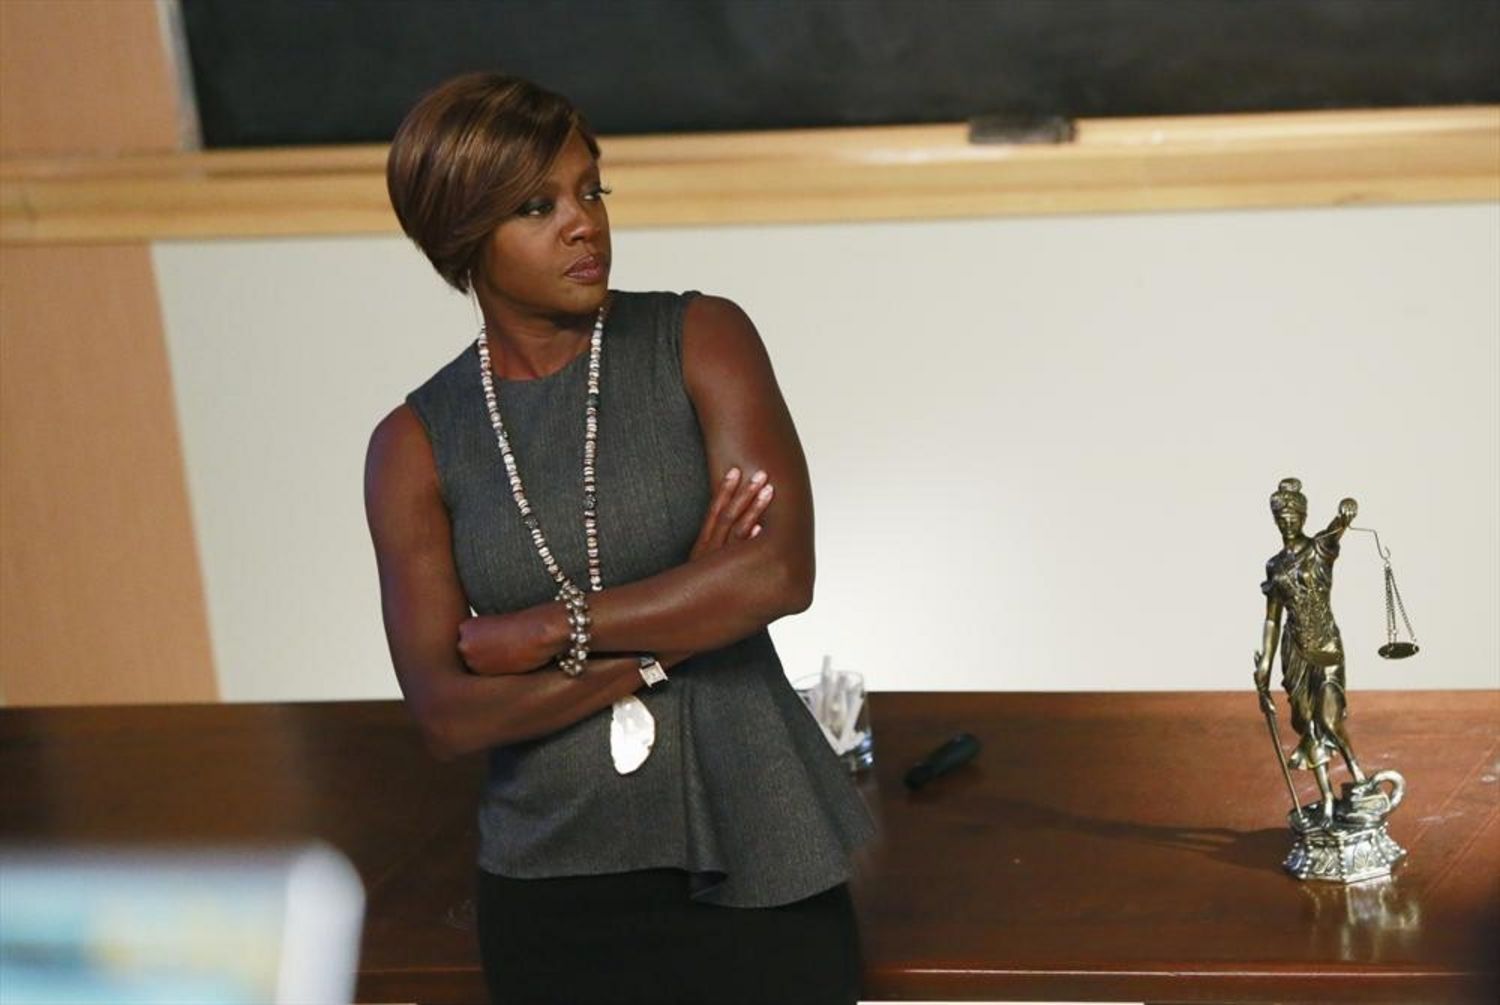 how to get away with murder - Pourquoi regarder How To Get Away With Murder sur M6 ? how to get away with murder season epi 3 annalise main